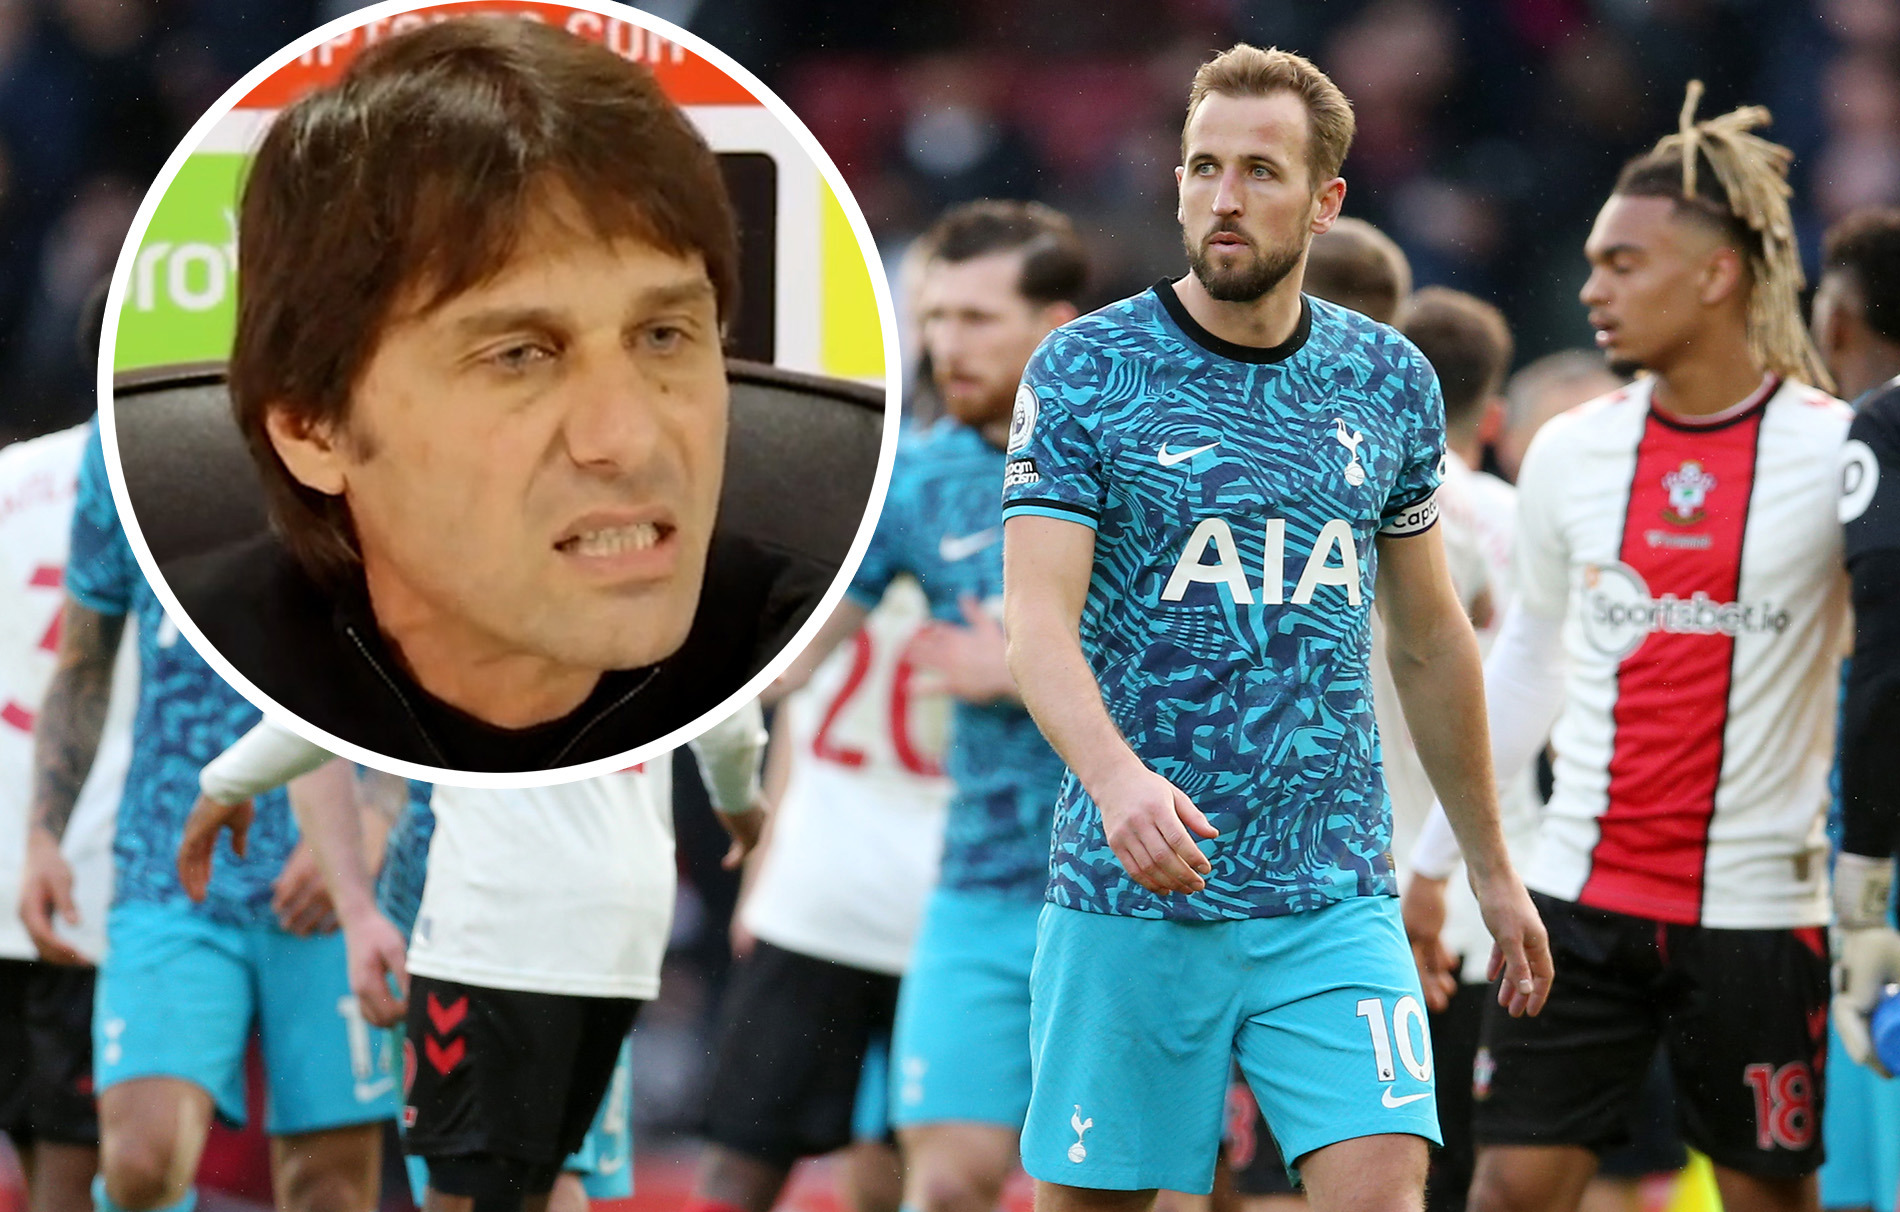 Tottenham manager Antonio Conte slammed his "selfish" players after a draw.